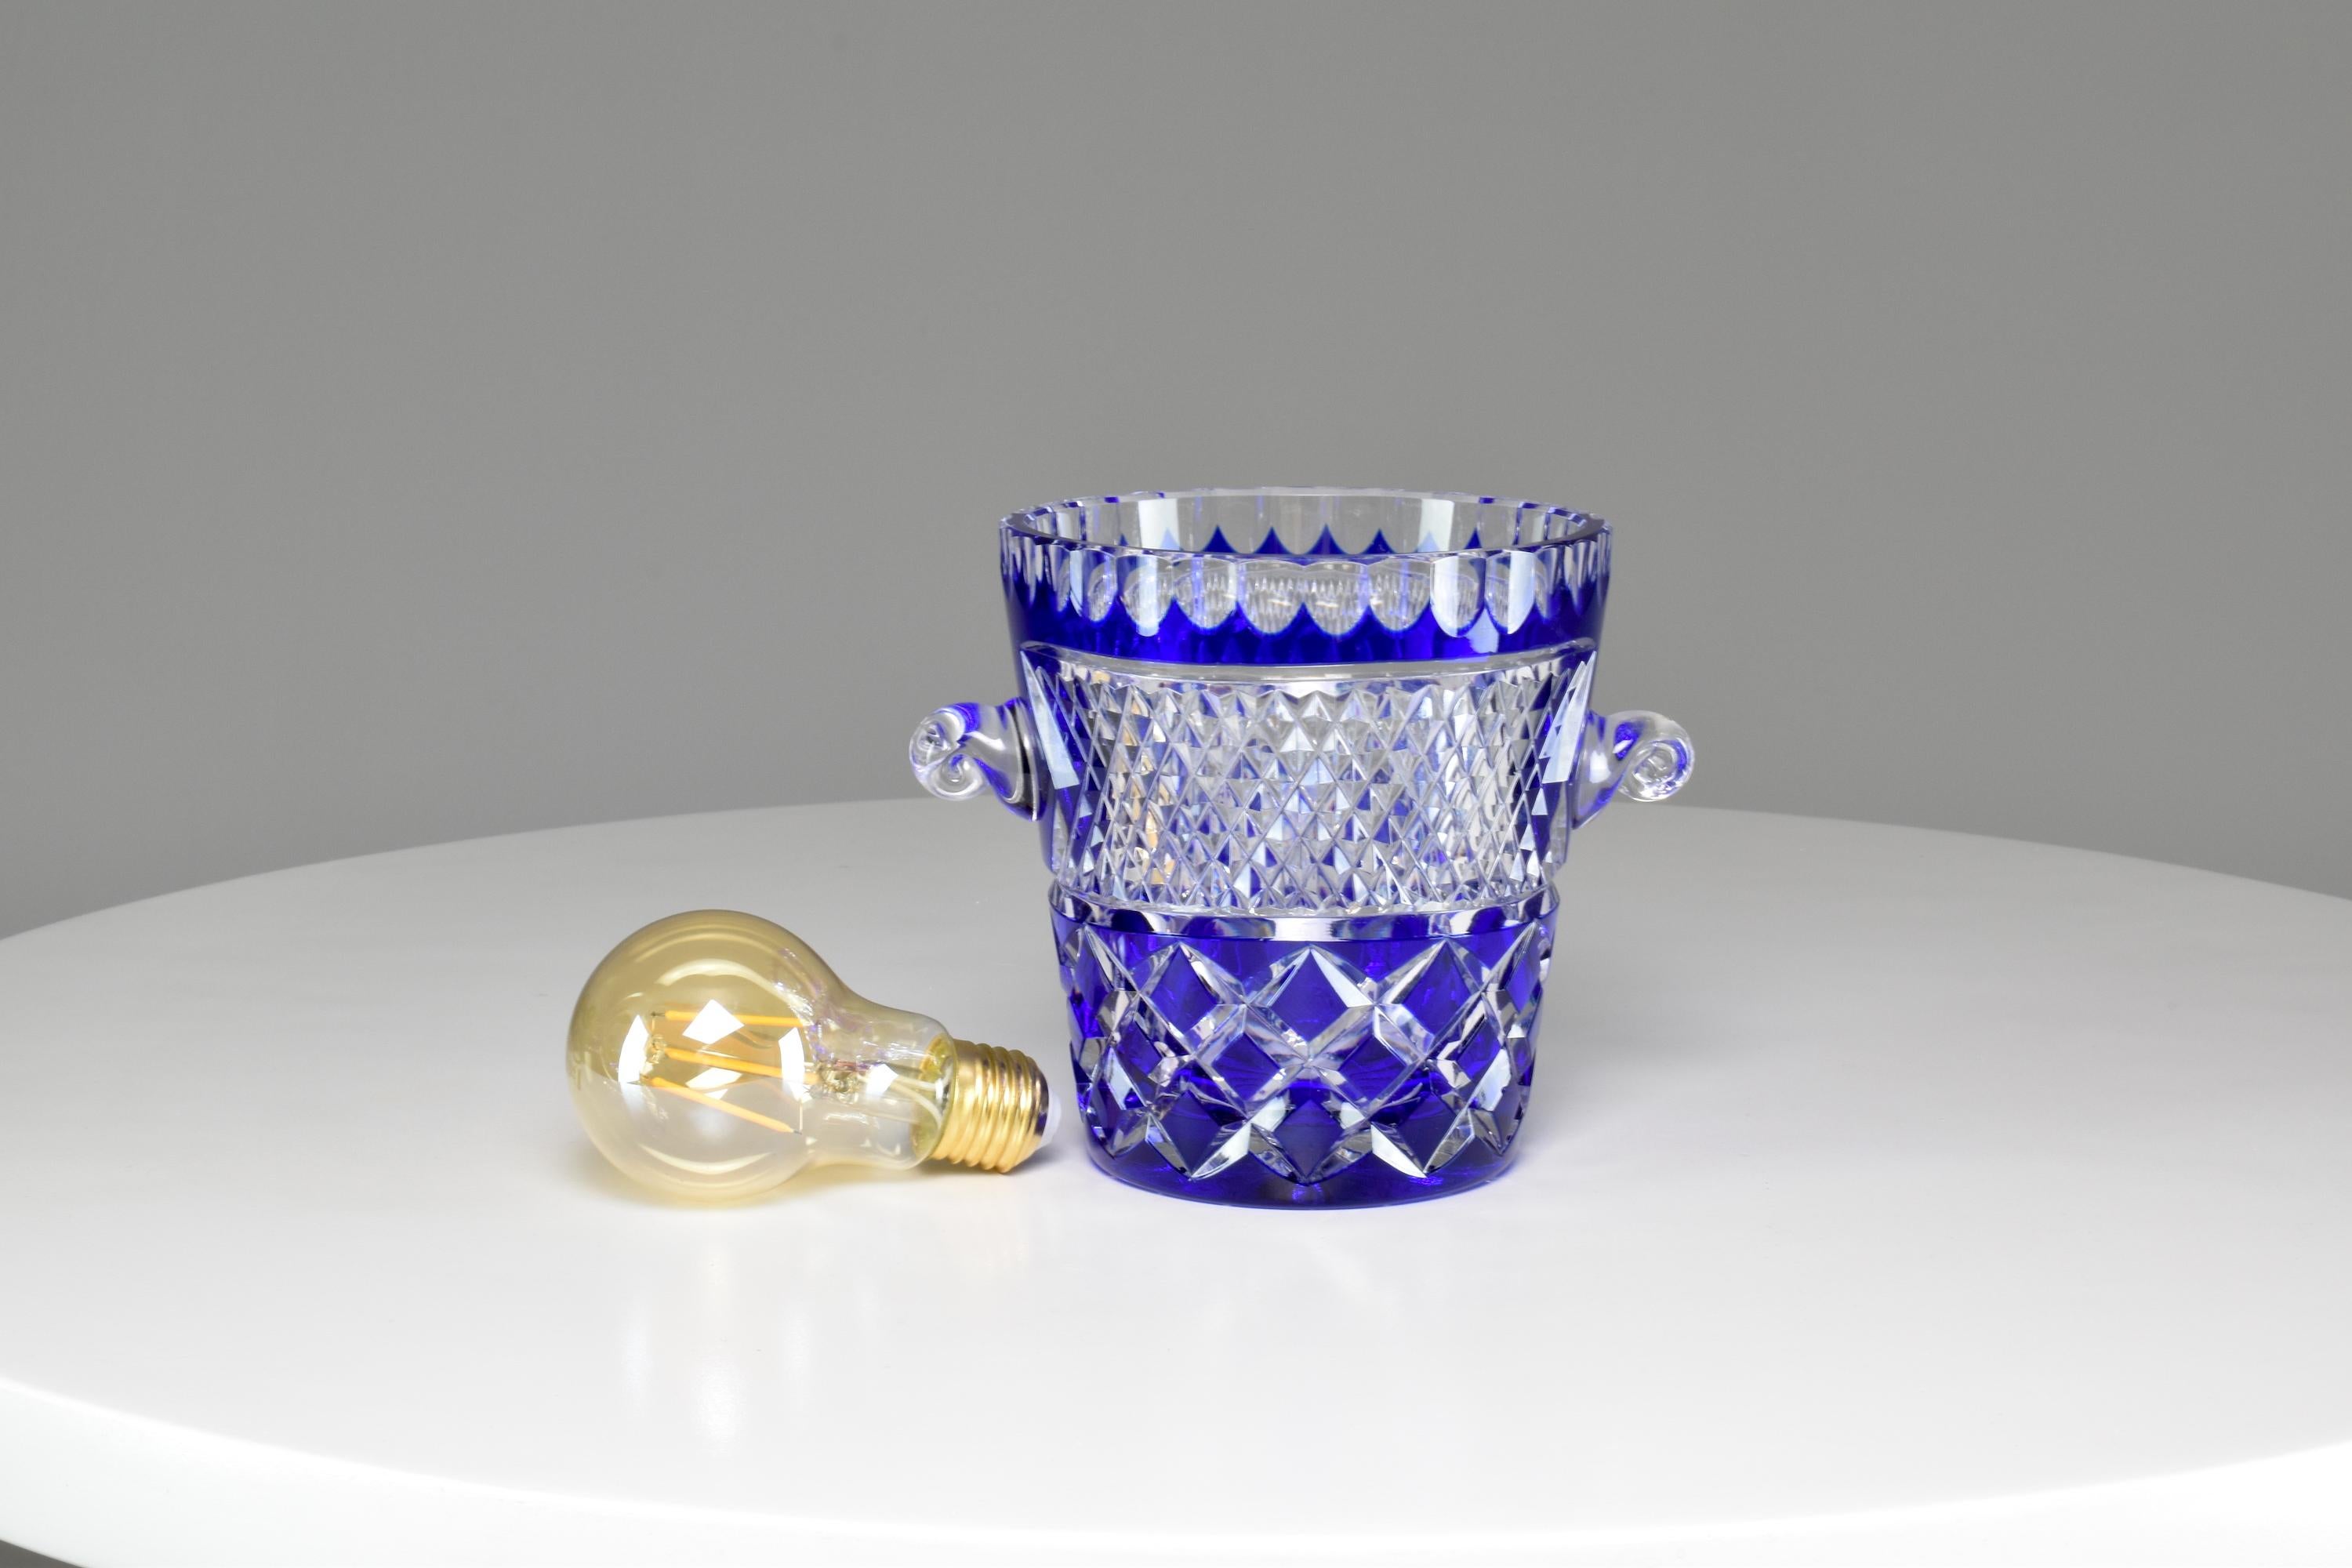 Superb late 20th Century French dark blue Ice or Champagne Bucket by Crystal de Bohême. This is a statement cut crystal piece.
-------

We are an exhibition space and an online destination established by the passionate art director behind Jonathan